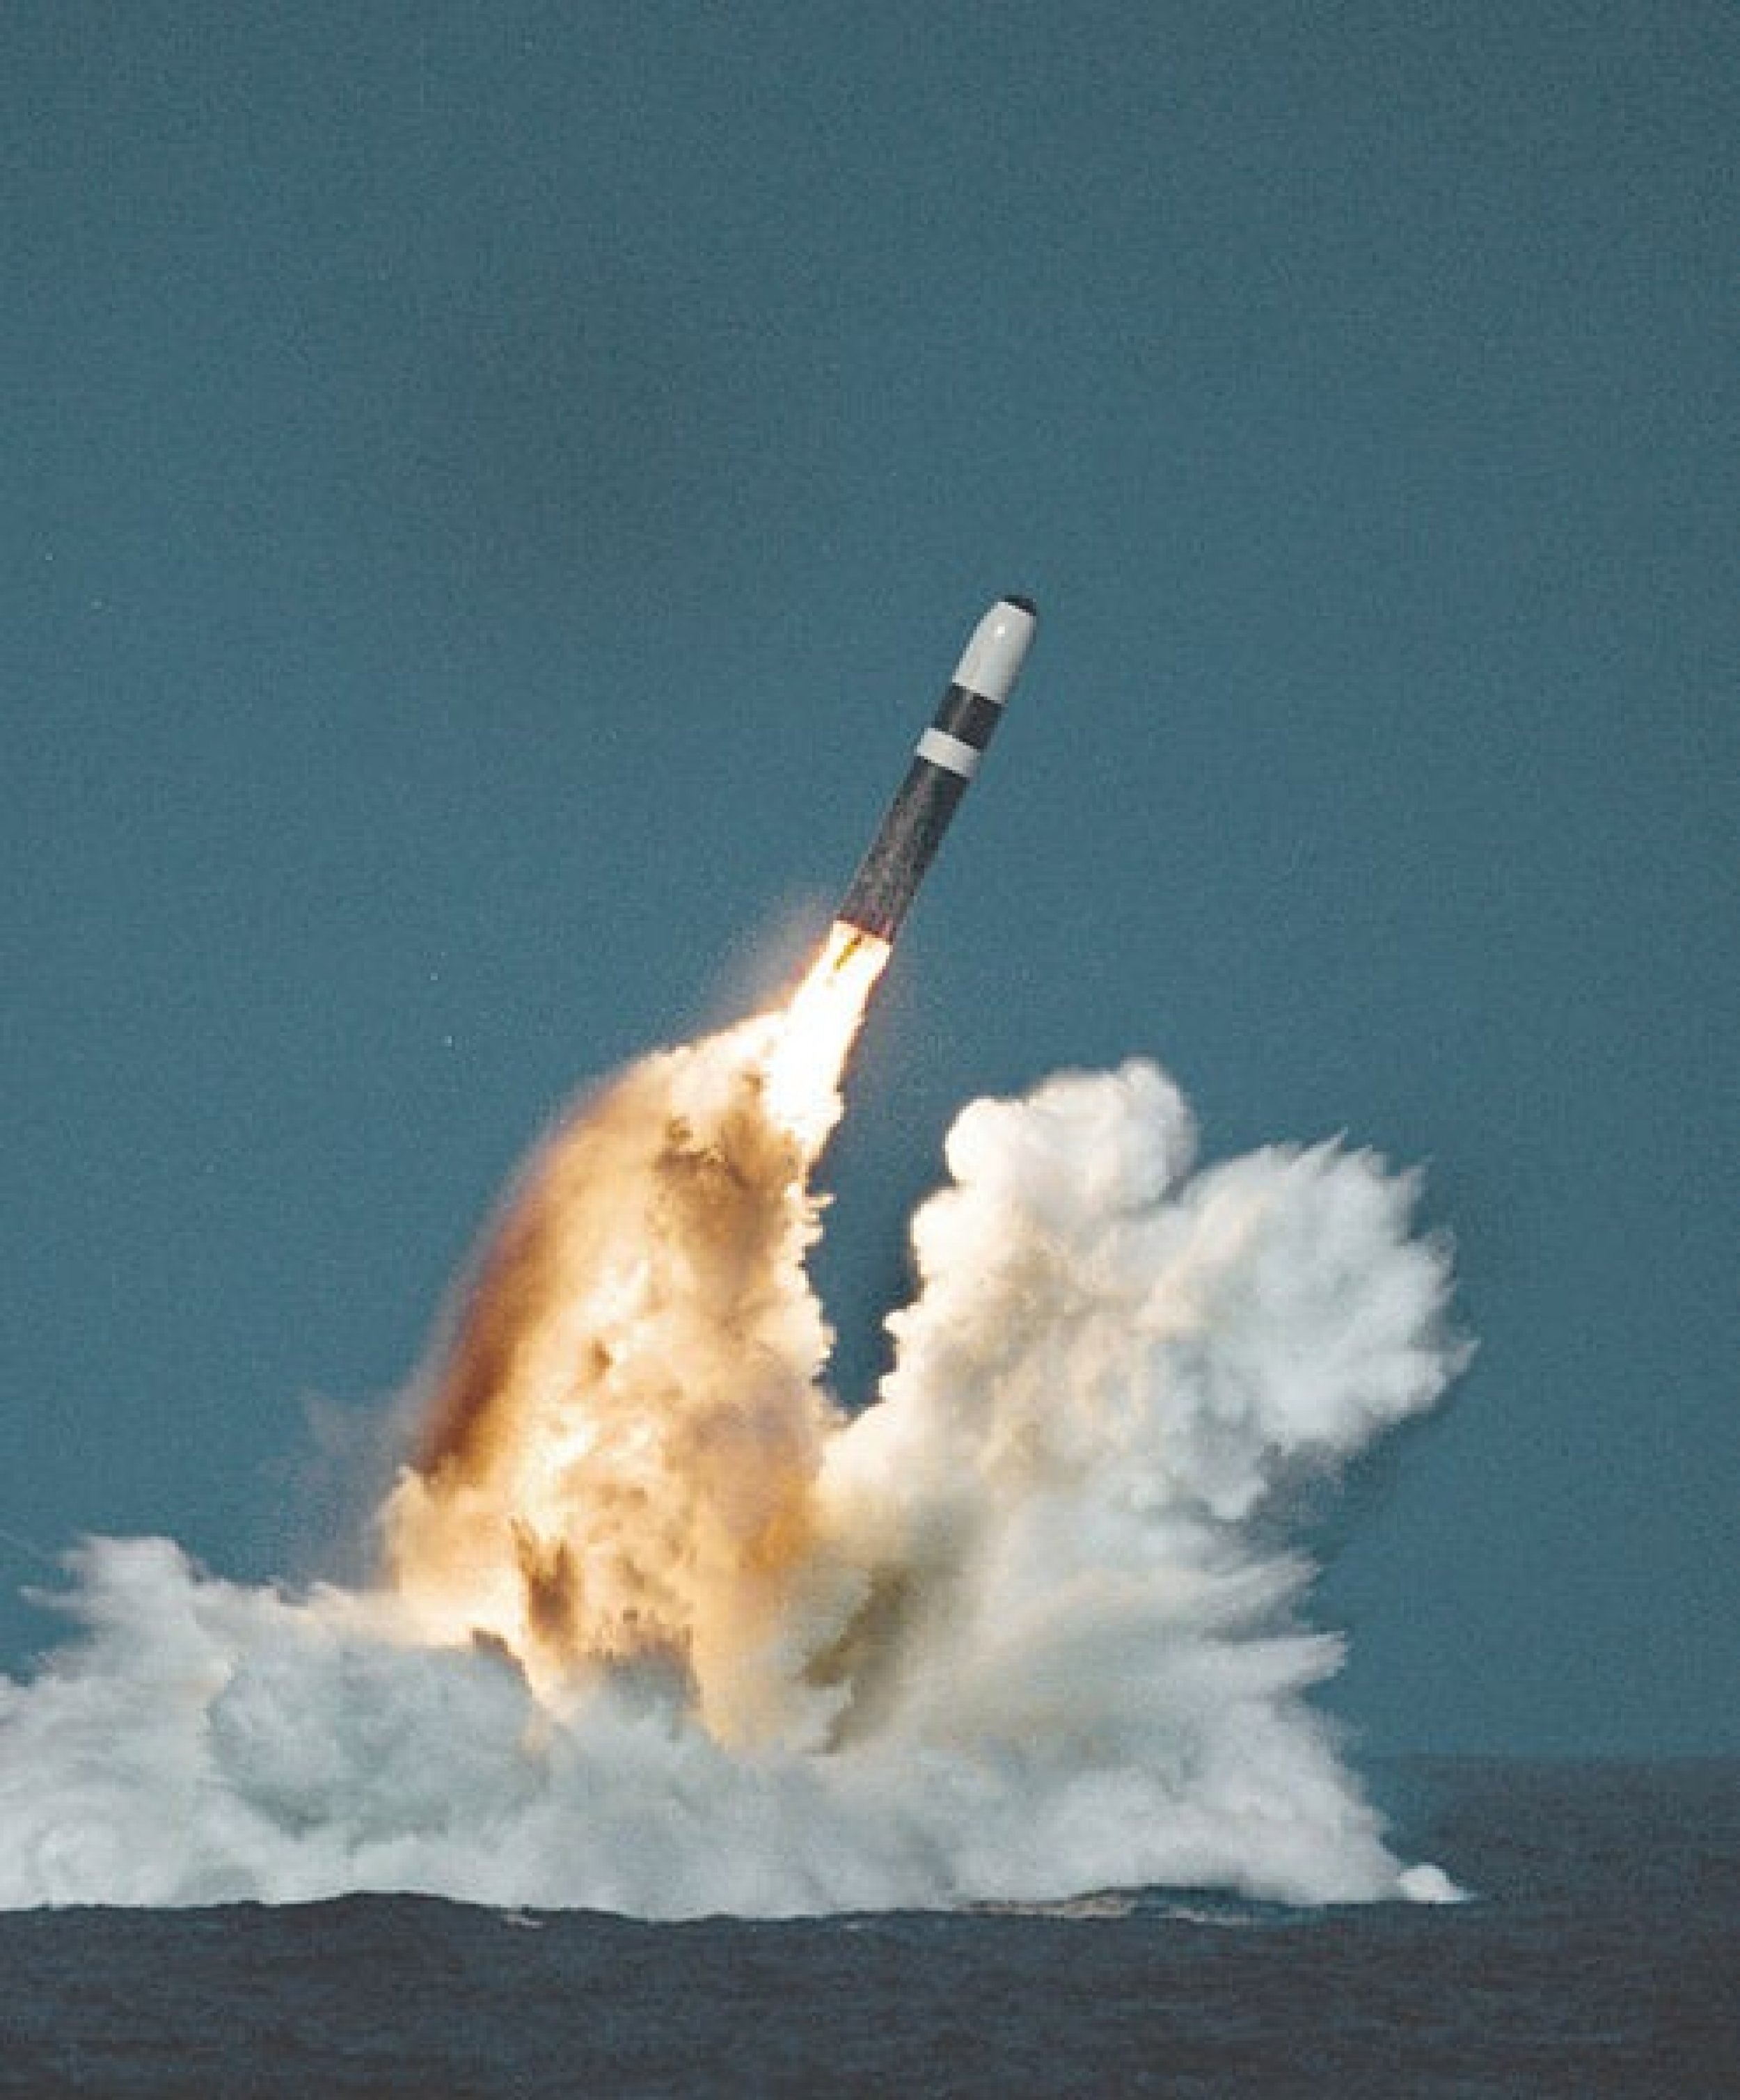 A Trident missile launched from a ballistic missile submarine.